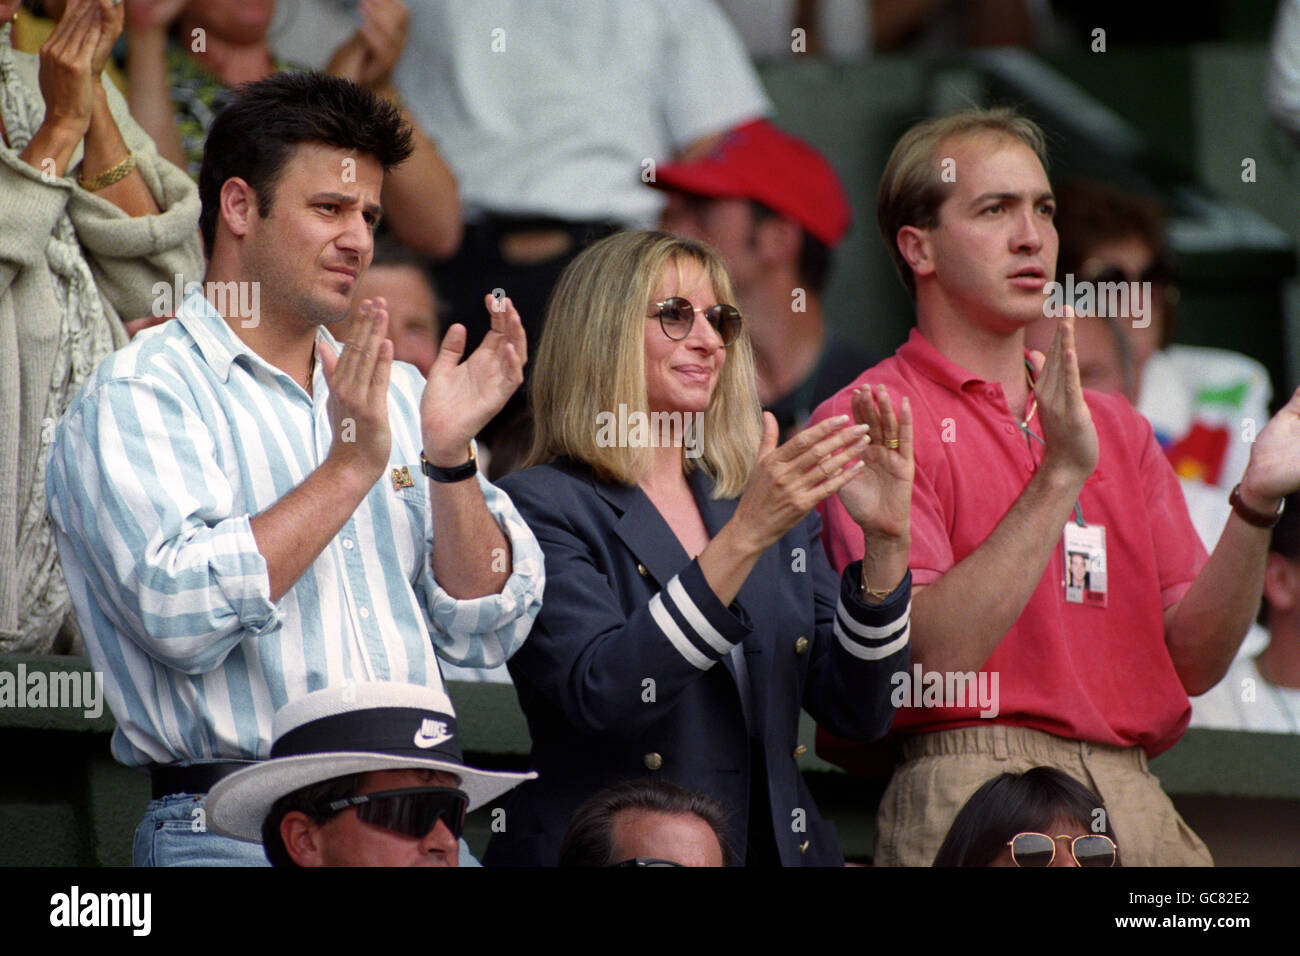 Barbra Streisand APPLAUDS ANDRE AGASSI ALONG WITH HIS BROTHER, PHILLIP (L)  AND AN UNIDENTIFIED MAN, DURING AGASSI'S QUARTER FINAL AGAINST PETE SAMPRAS  Stock Photo - Alamy